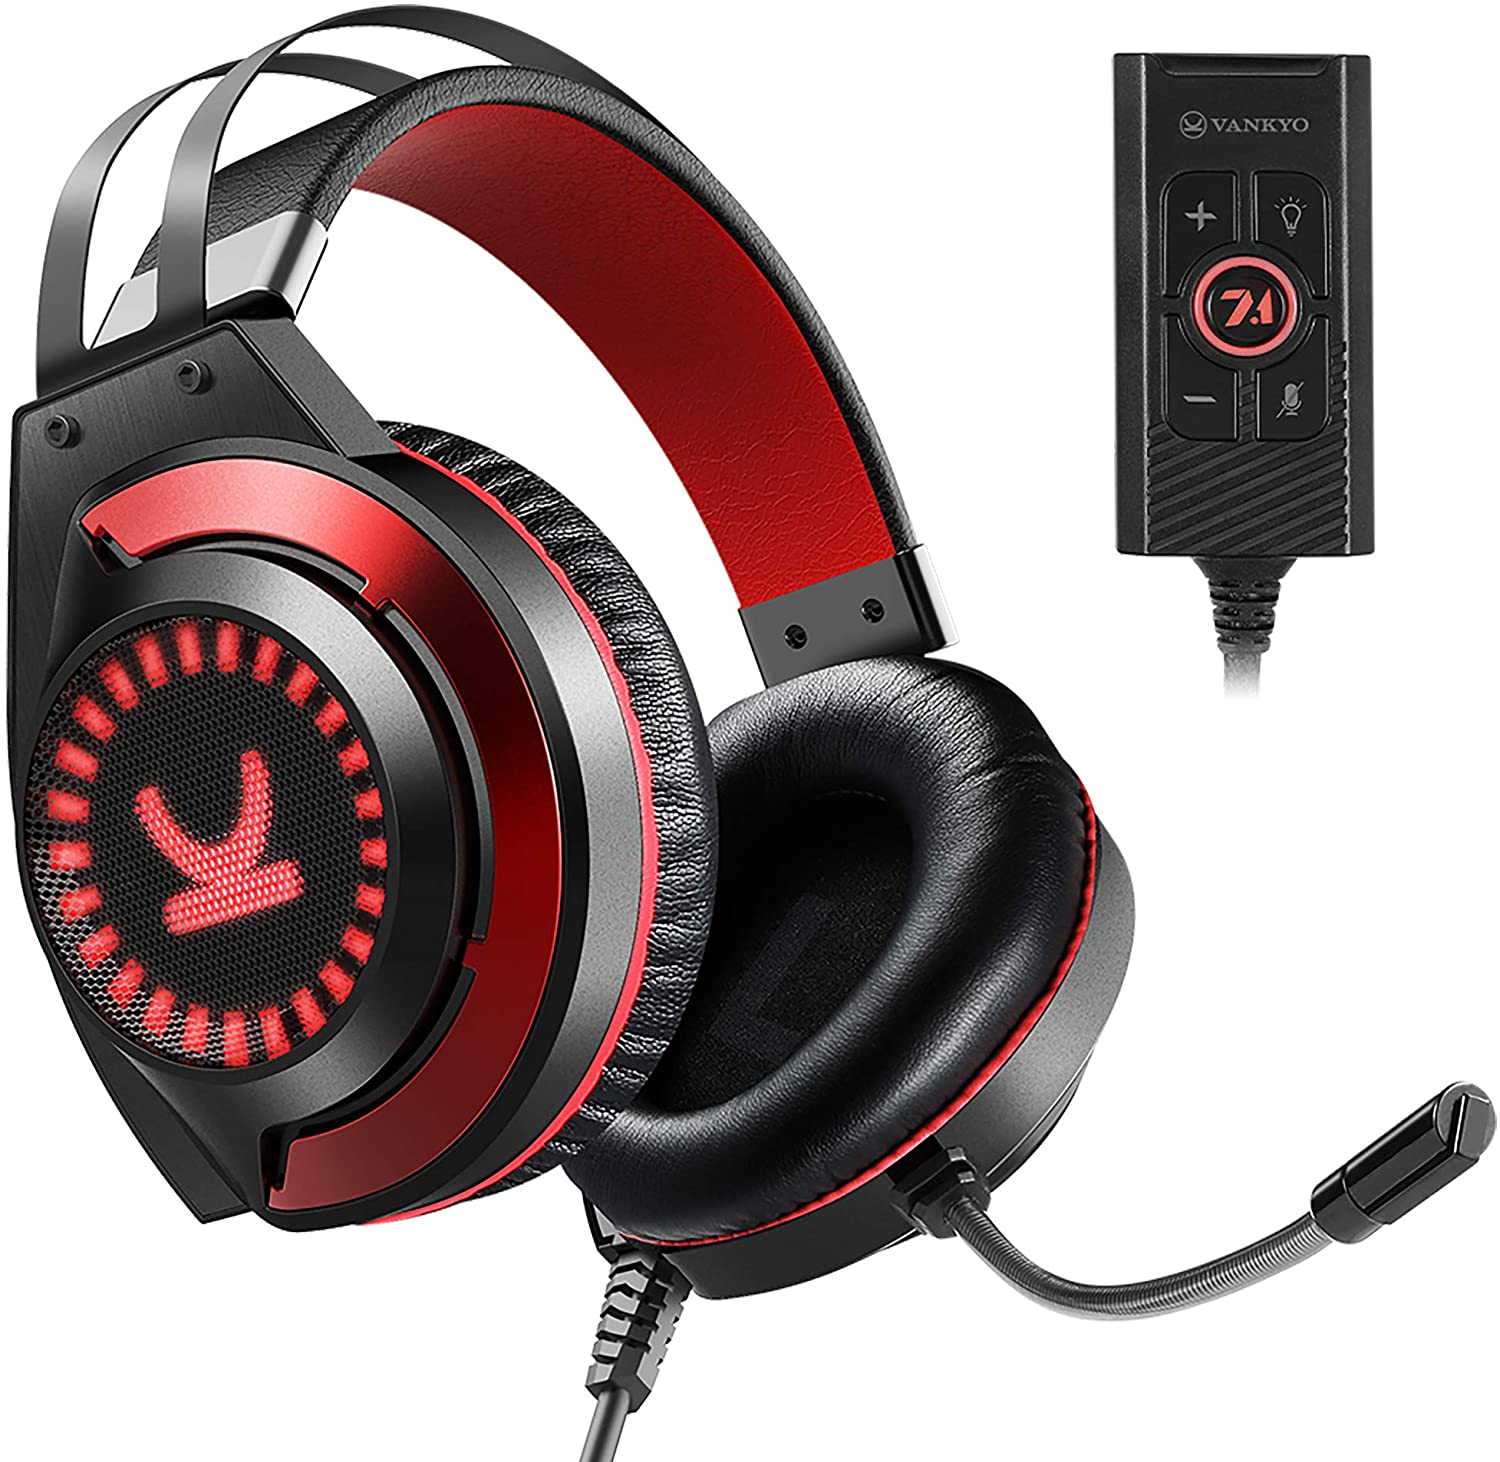 Commander  CM7000 Pro PS4 Headset with 7.1 Surround Sound Stereo Xbox One Headset - e4cents